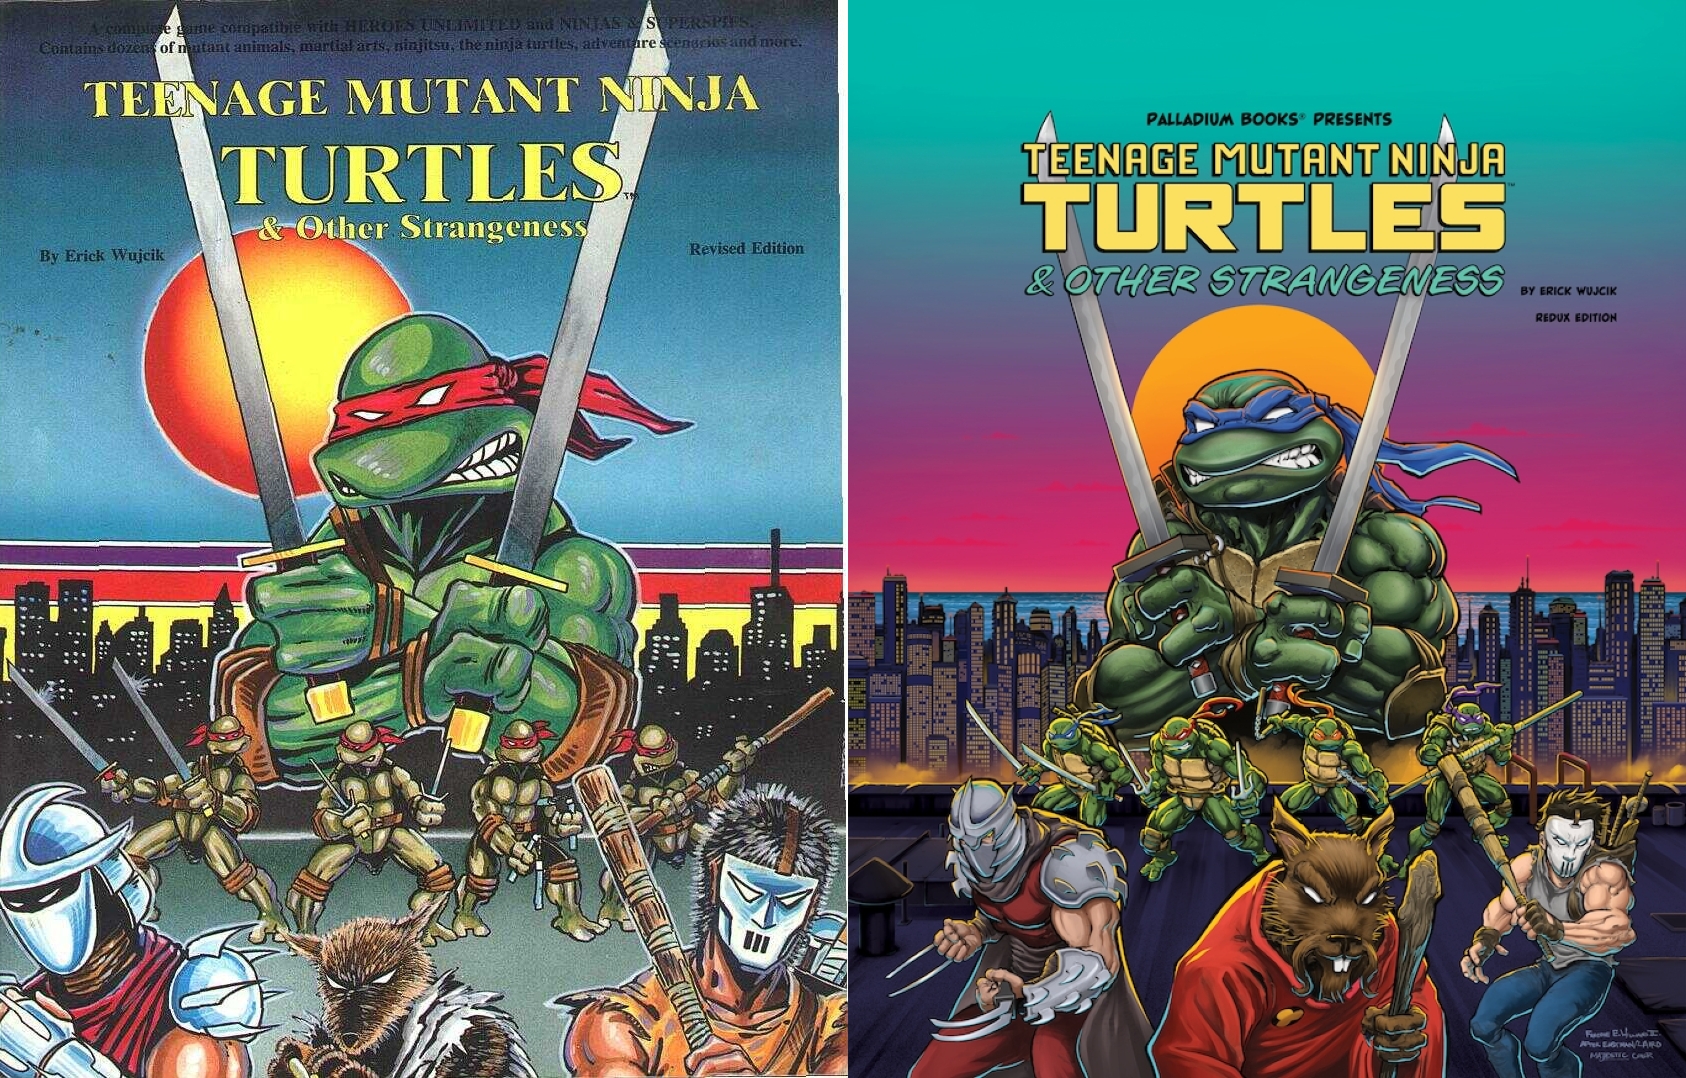 Anyone else think that TMNT deserves an adult oriented series? I feel like  a series that could focus on darker plot lines and adult themes, without  having to worry about being kid